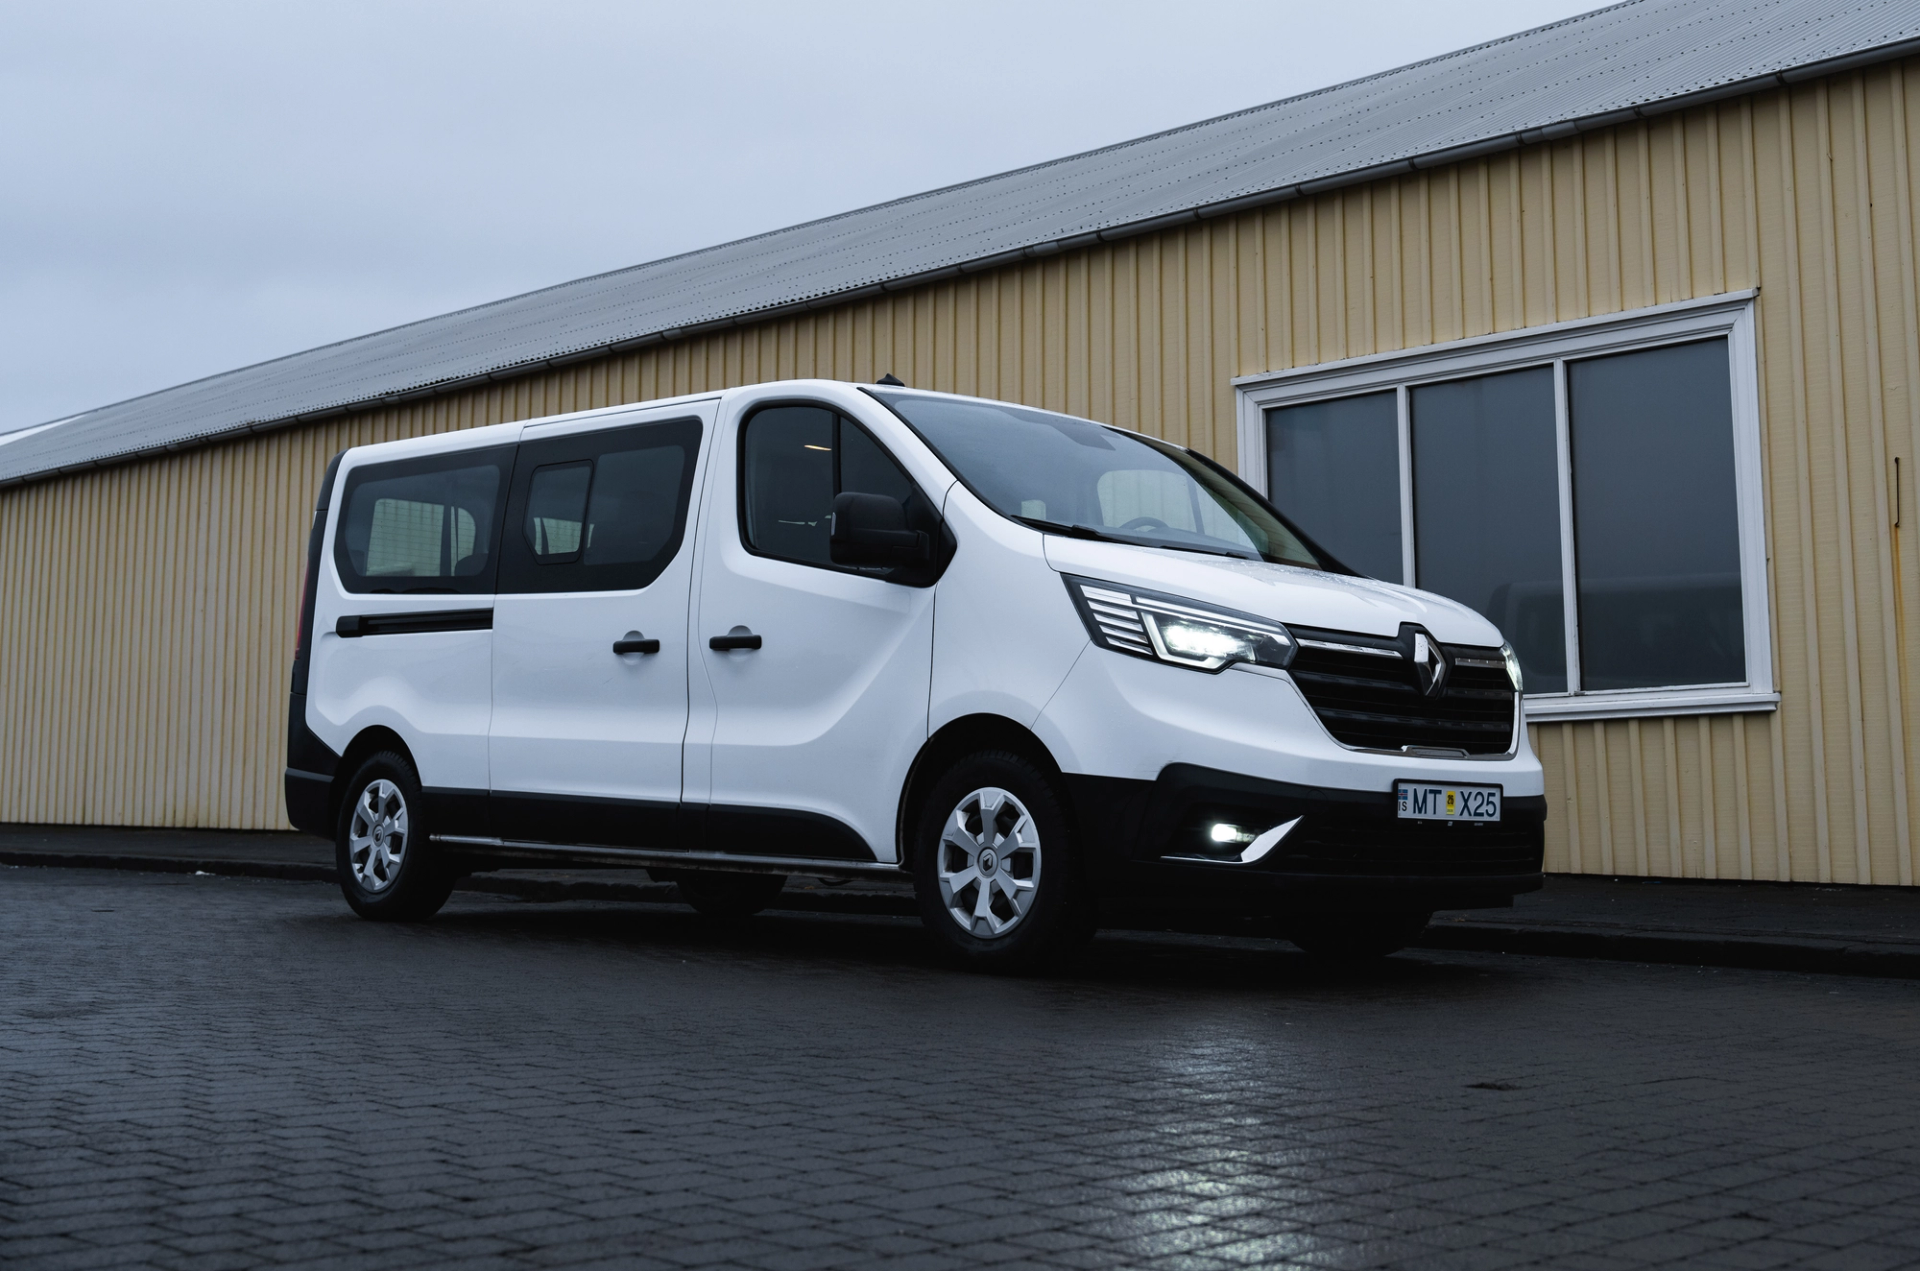 Renault Trafic Rental (9 Seater) in Iceland